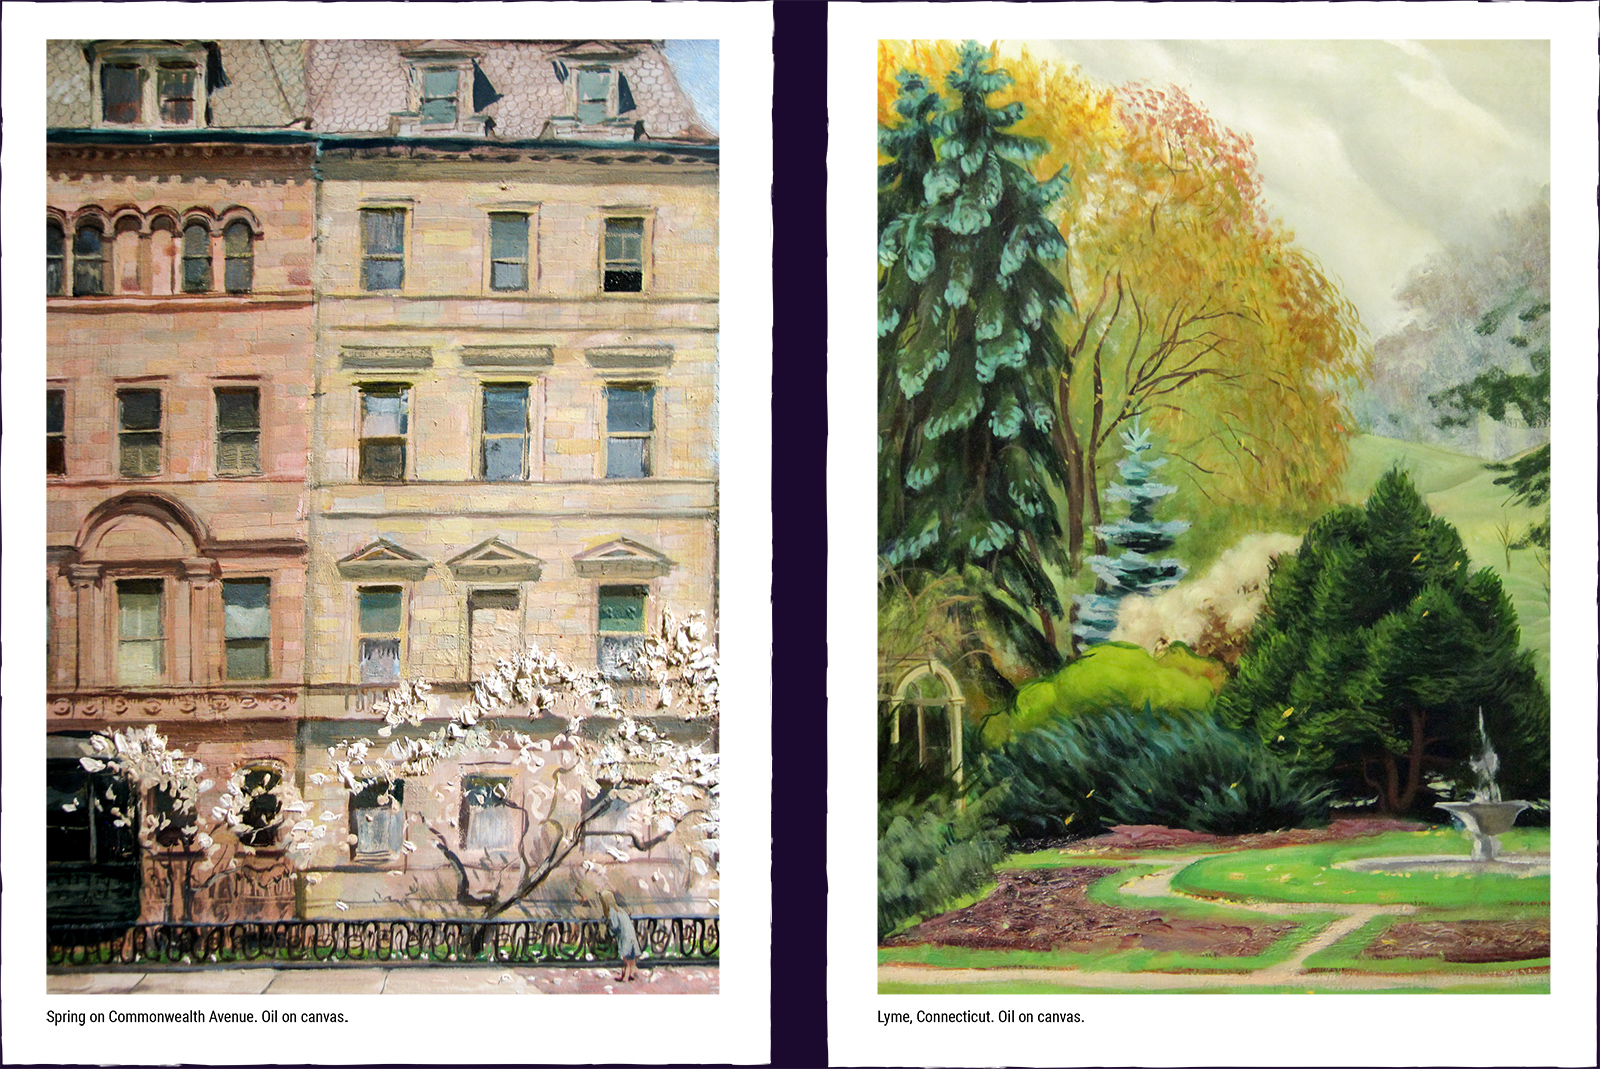 Two landscape paintings. (1) Spring on Commonwealth Avenue. Oil on canvas. (2) Lyme, Connecticut. Oil on canvas.